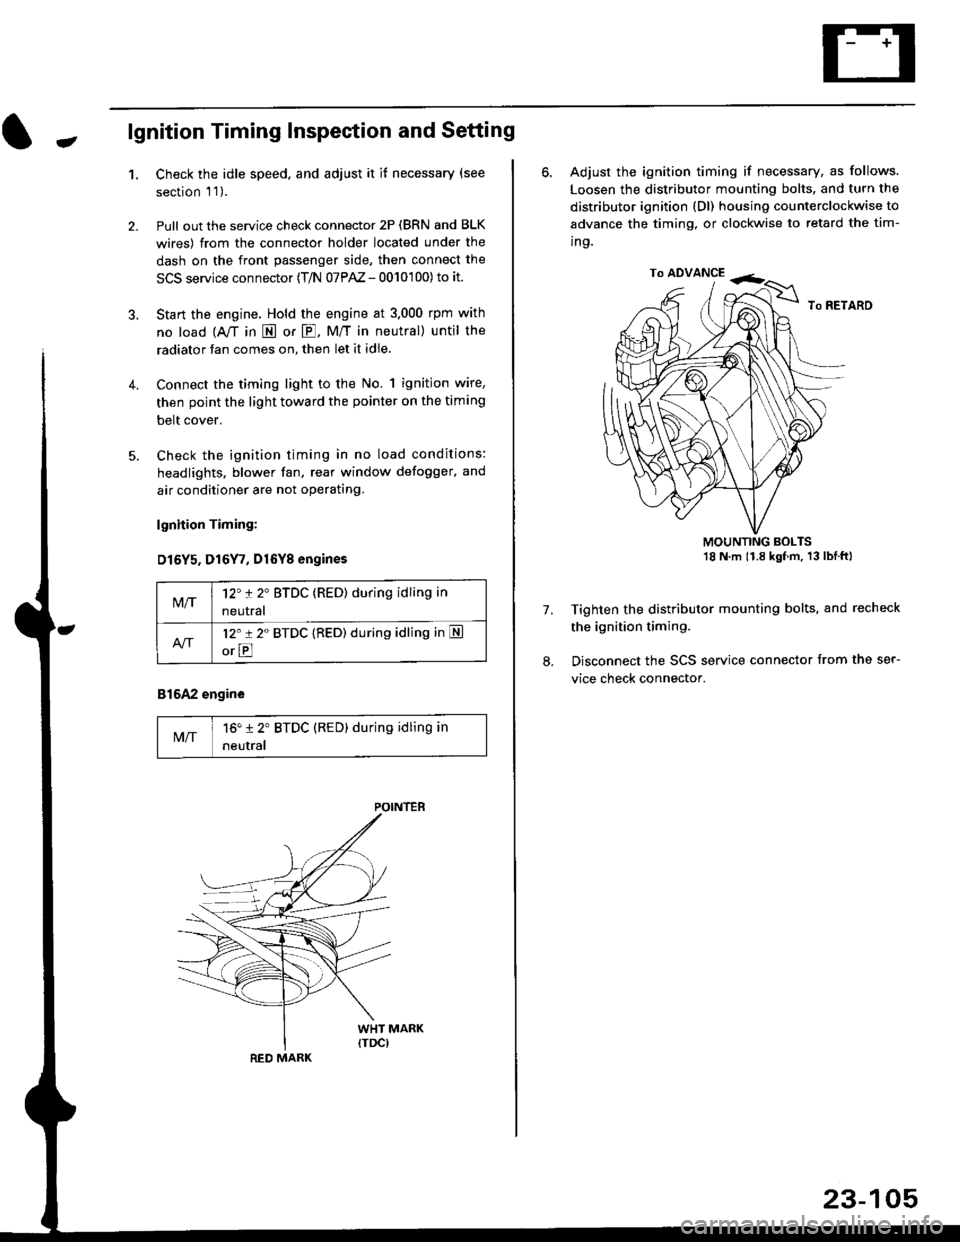 HONDA CIVIC 1998 6.G Service Manual -lgnition Timing Inspection and Setting
1.Check the idle speed, and adjust it it necessary (see
section l 1 ).
Pull out the service check connector 2P (BRN and BLK
wires) from the connector holder l